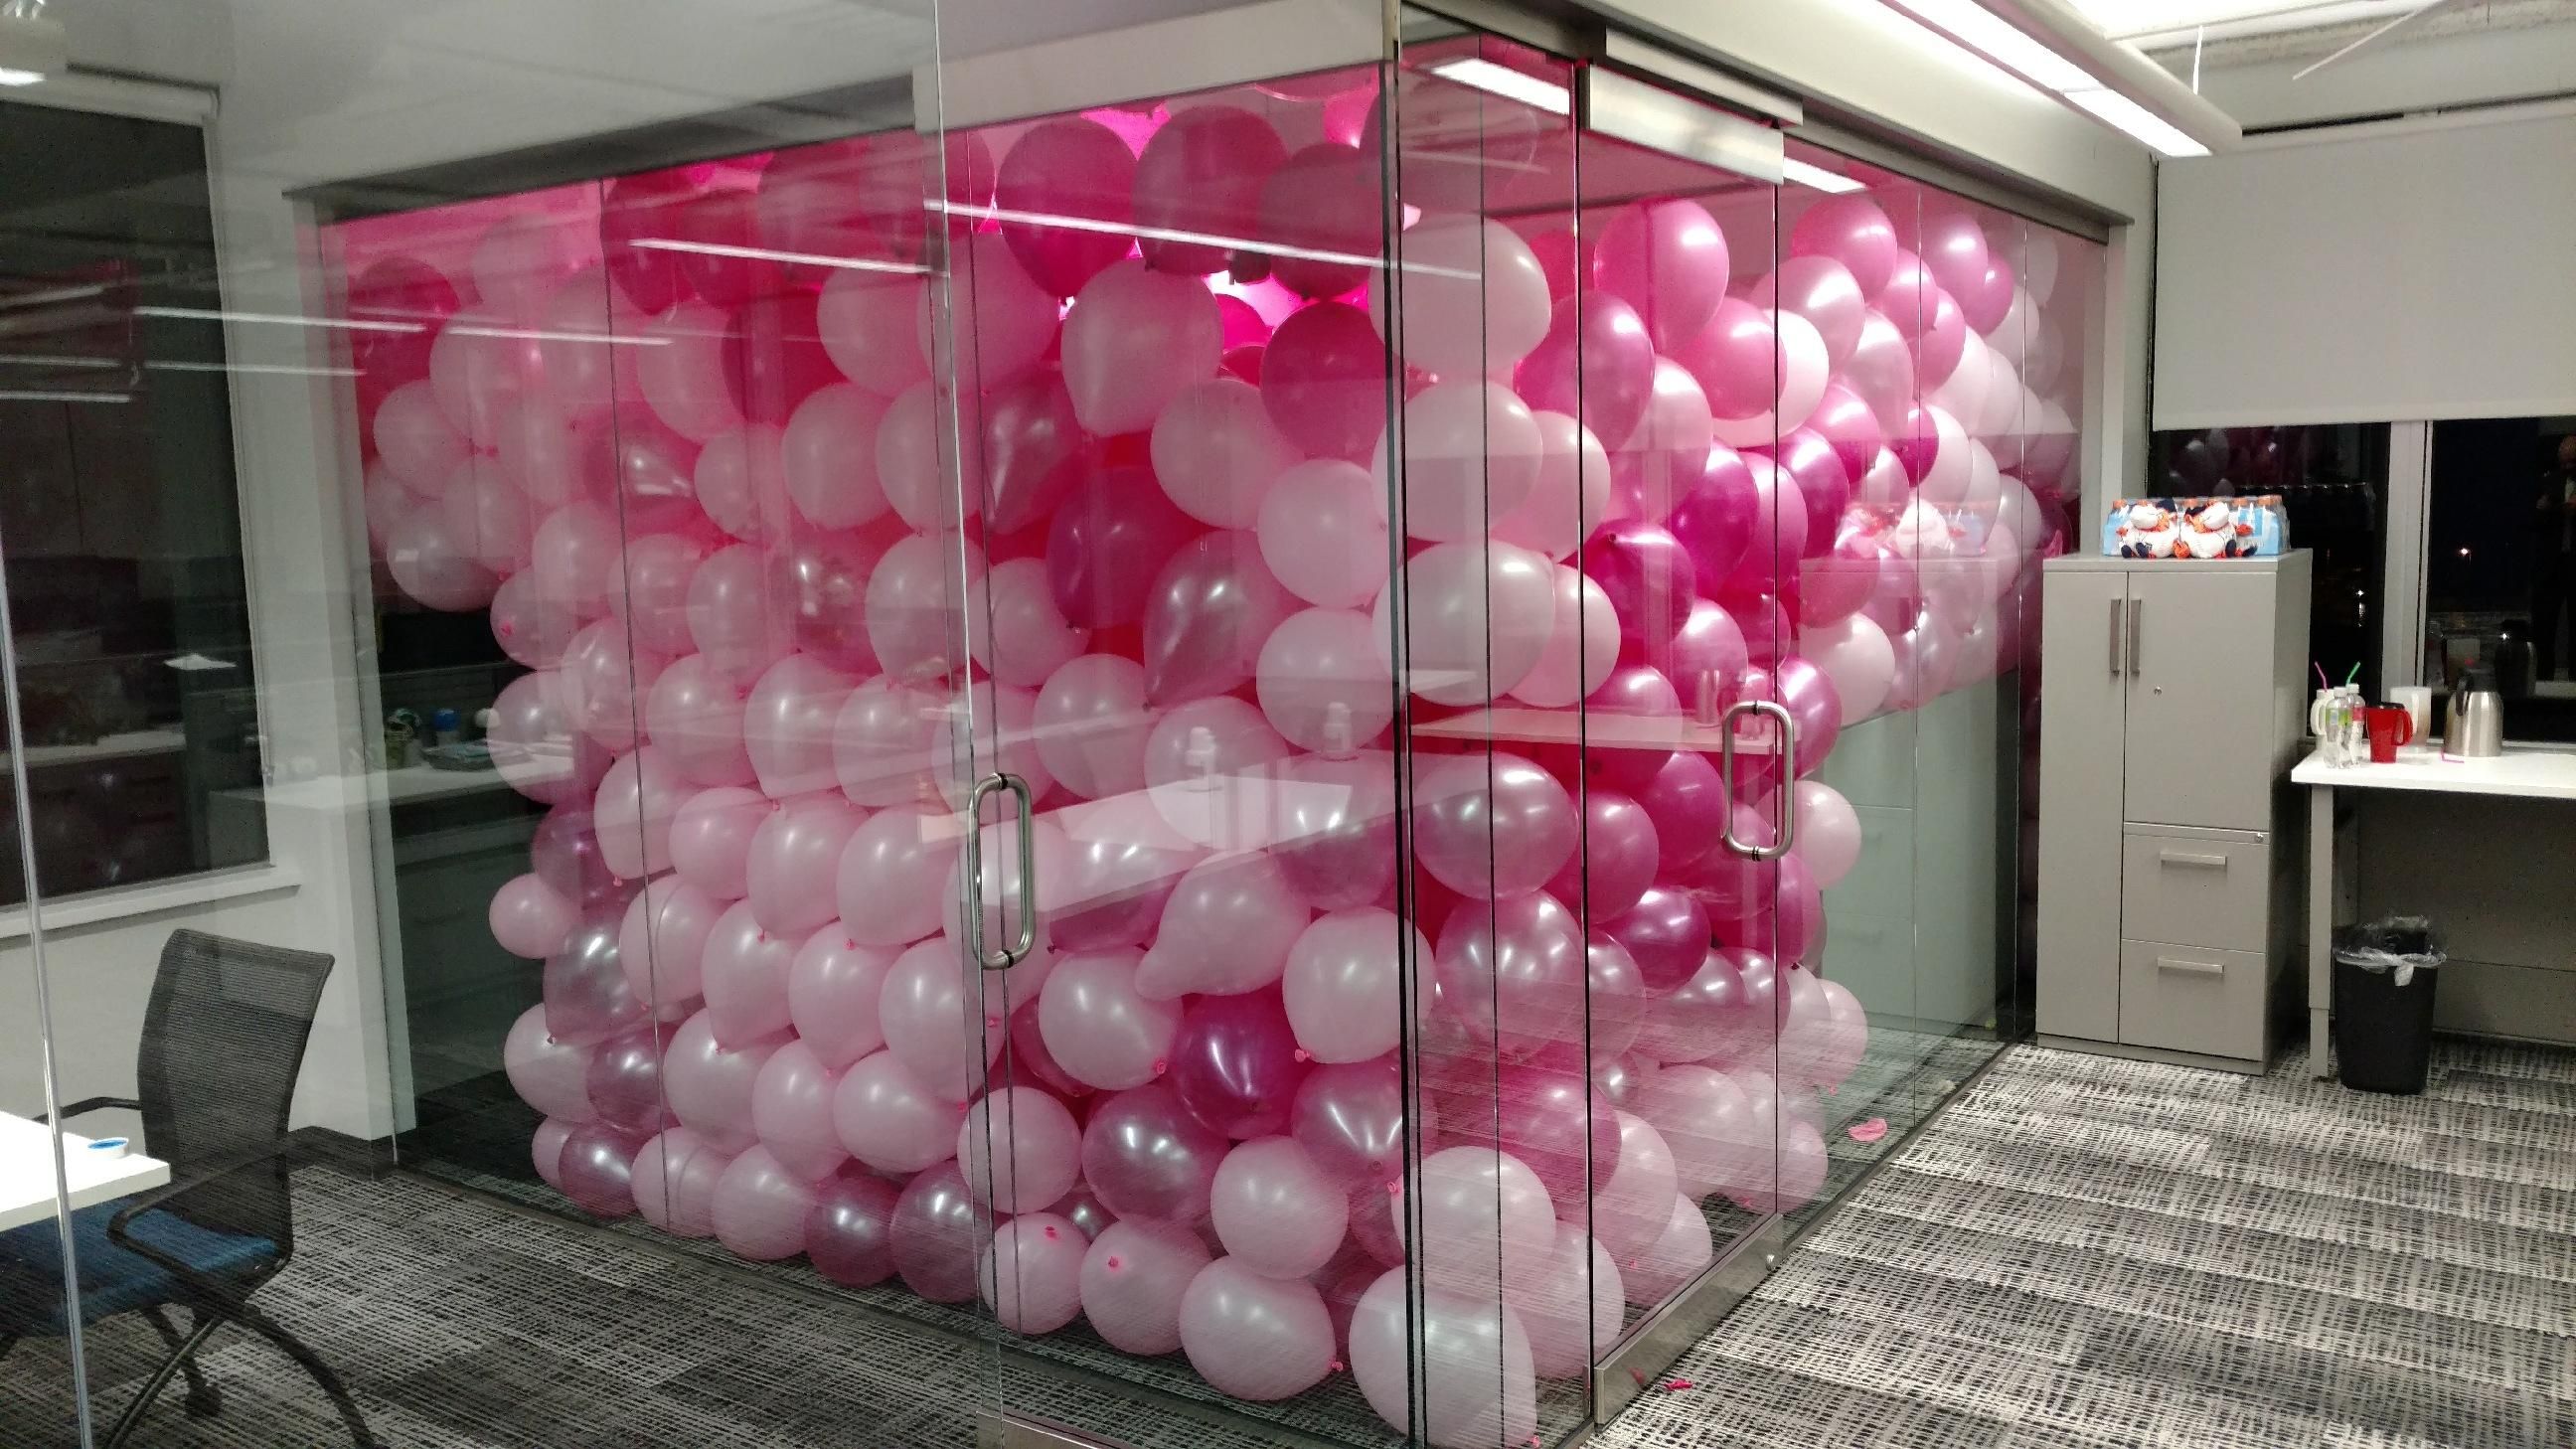 A co-worker is having a girl. Thought we'd congratulate him.